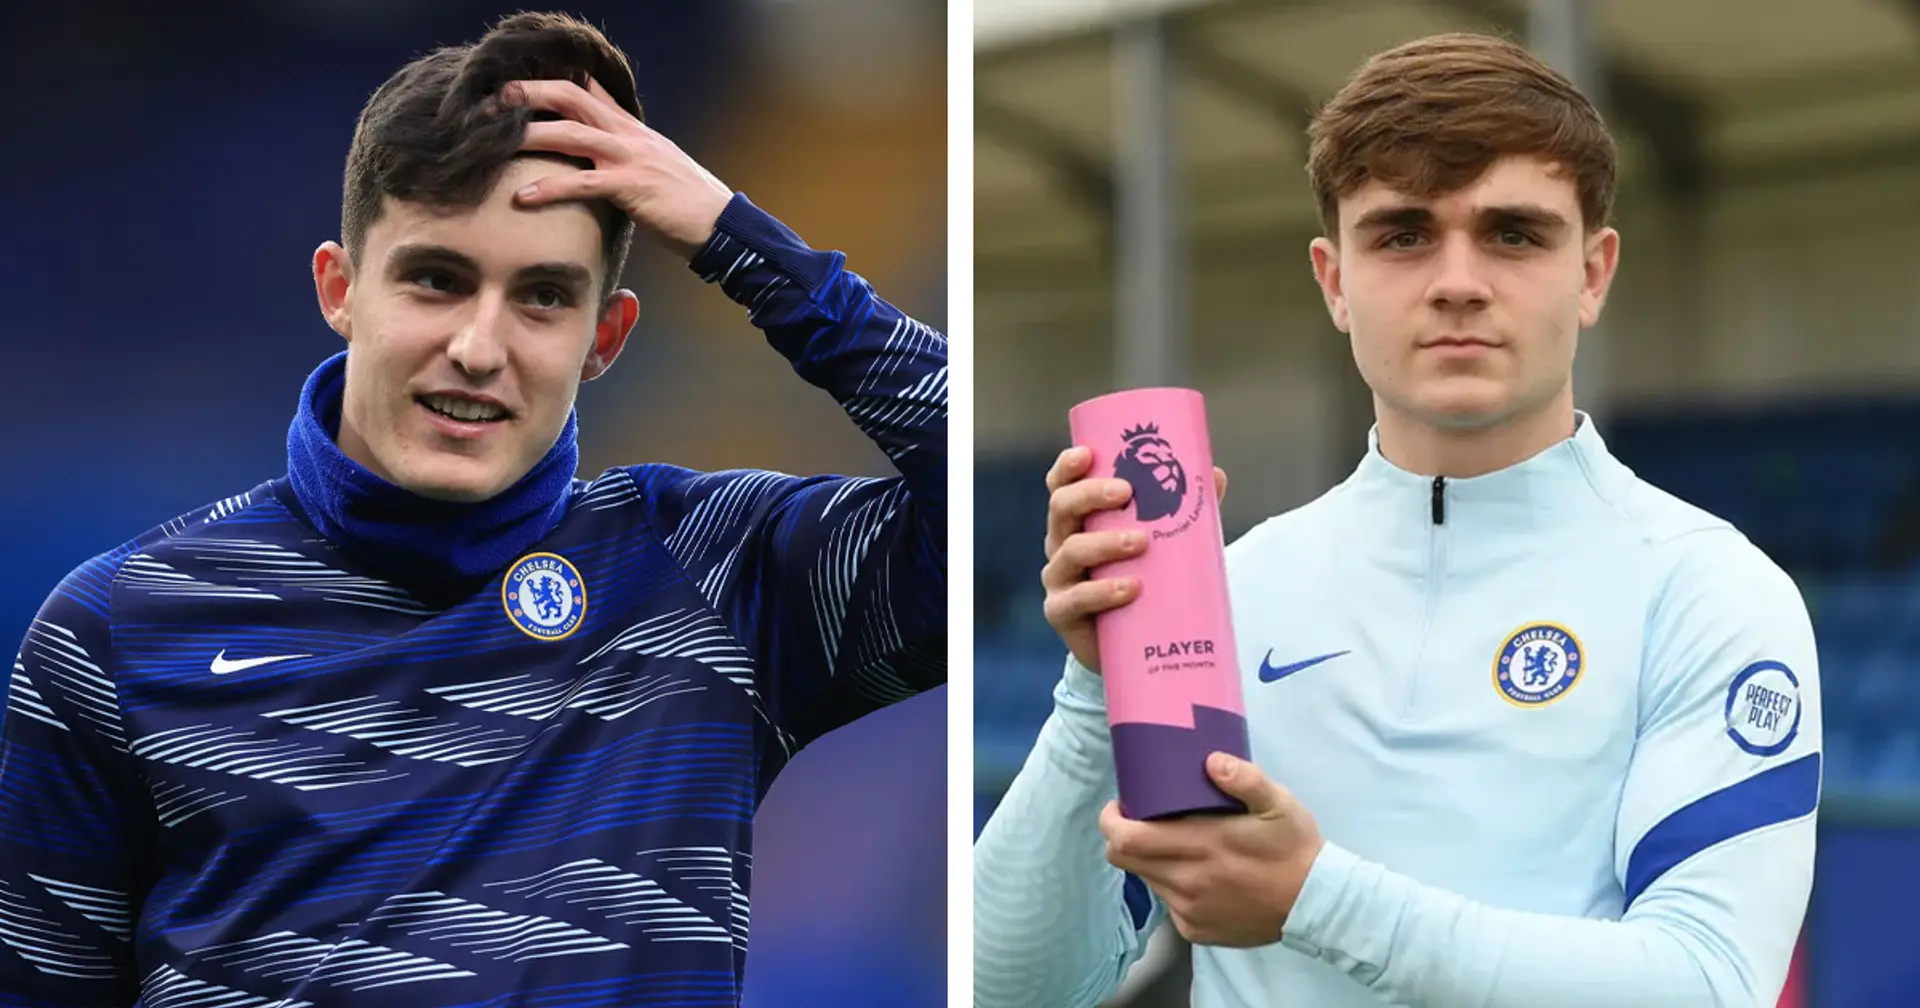 Standout Chelsea youngsters stall on agreeing new deals amid concerns over first-team path - The Athletic (reliability: 5 stars)